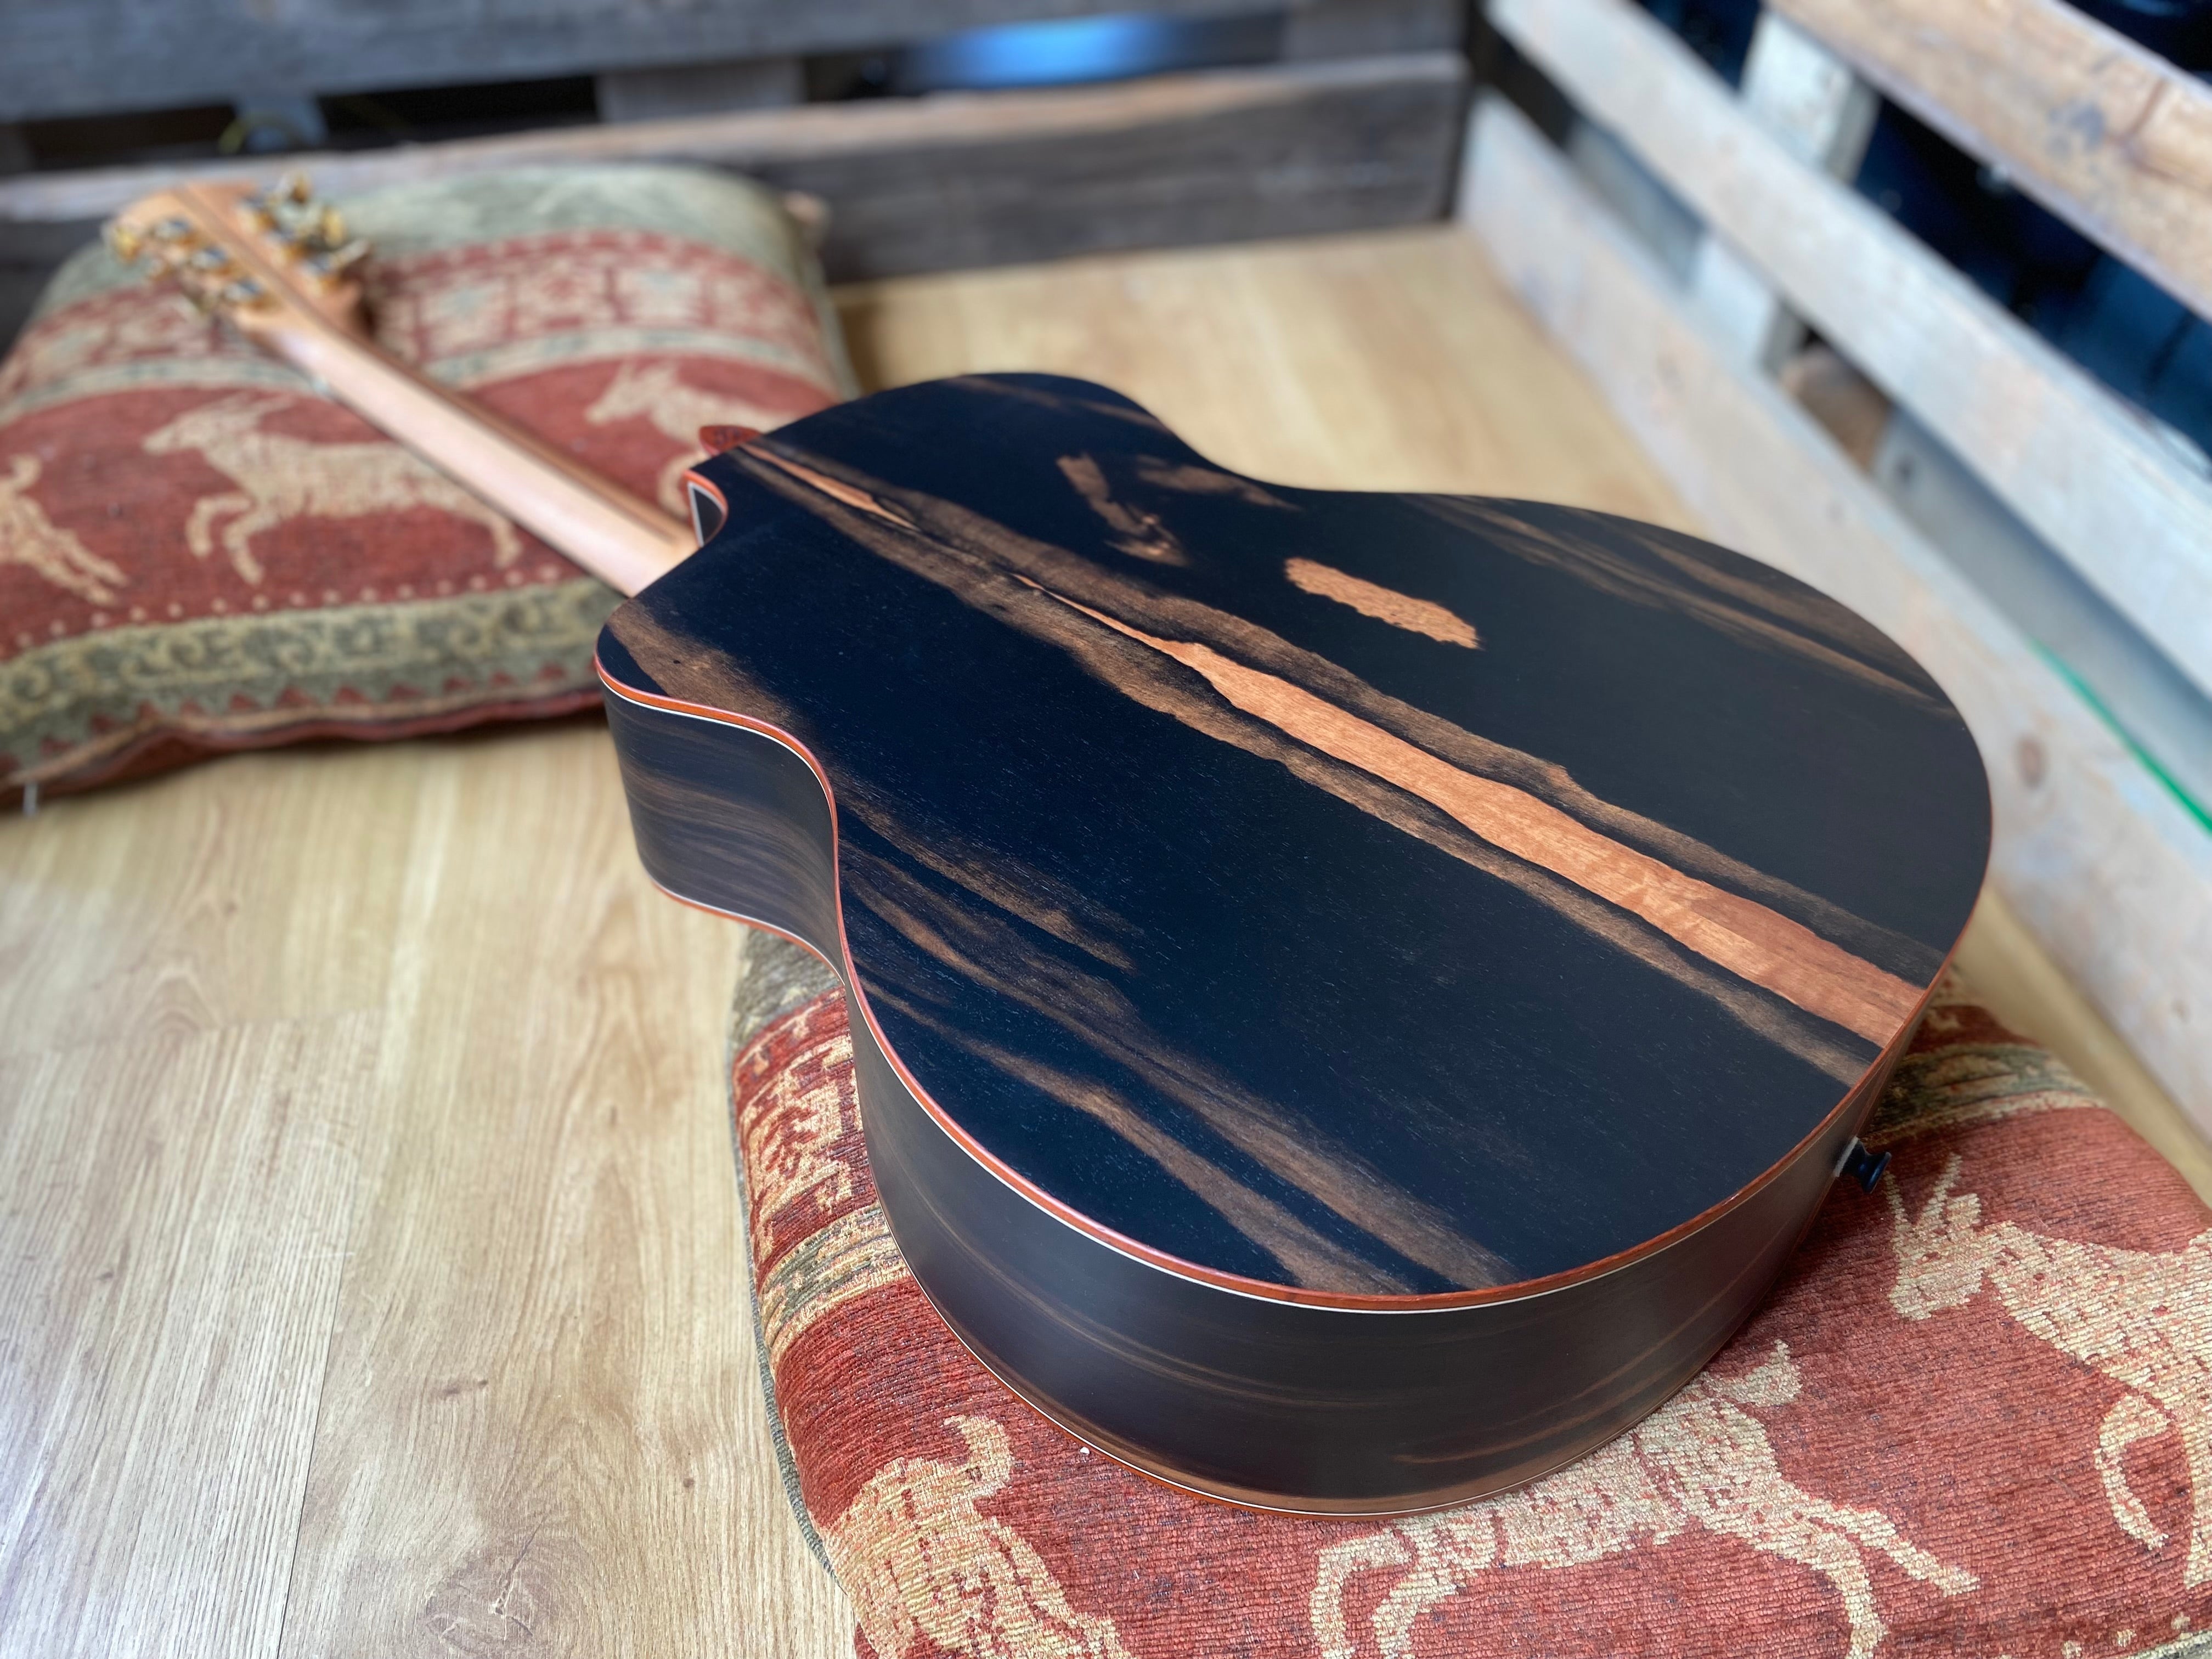 Dowina Figured Ebony GAC Deluxe Masters With Torrifed Swiss Moon Spruce Top, Acoustic Guitar for sale at Richards Guitars.